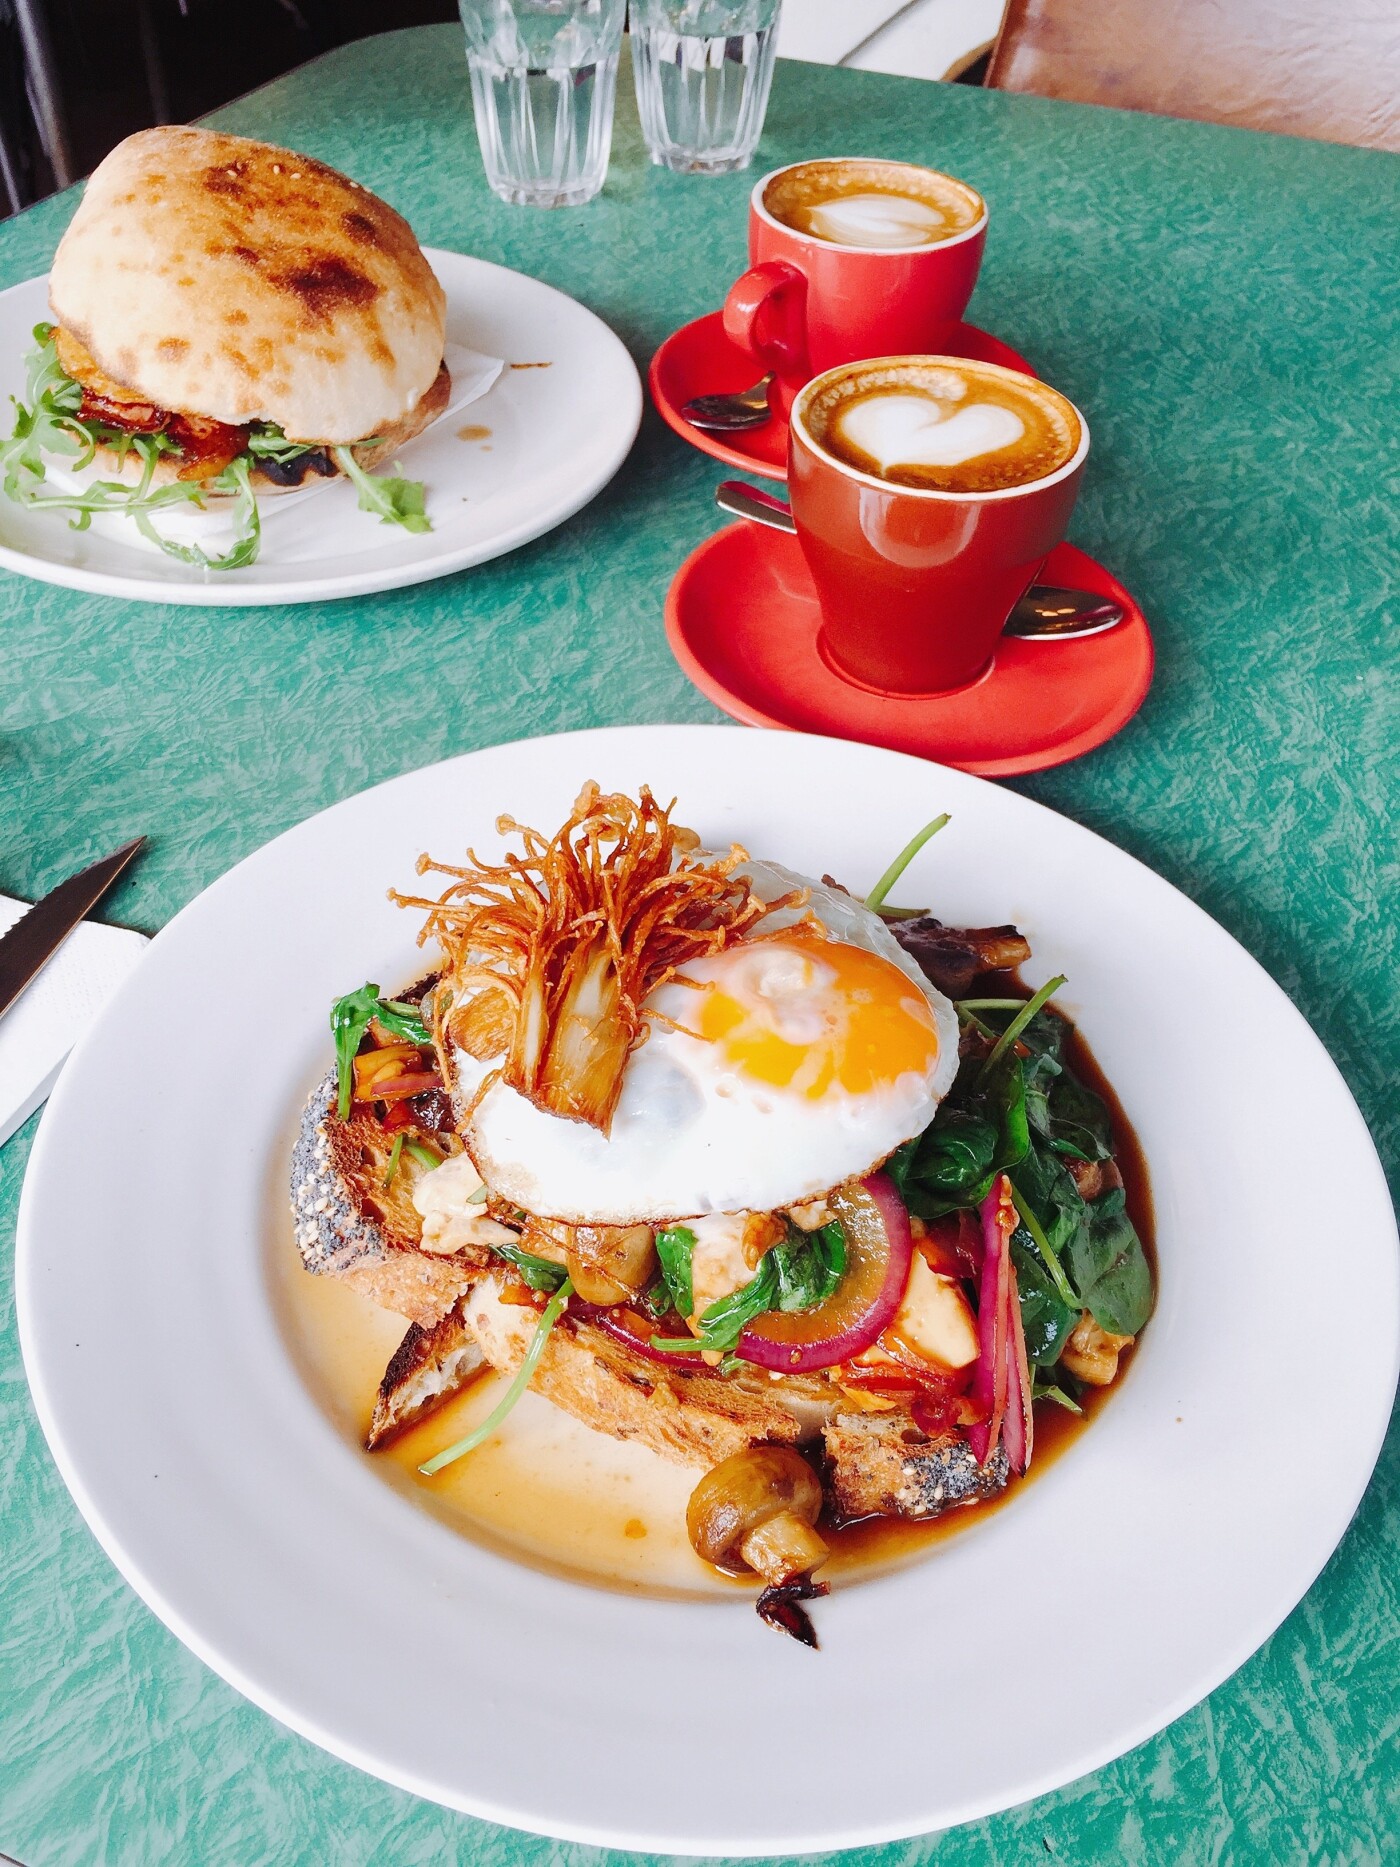 My breakfast on the last day of my holiday in Melbourne. A plate of scrambled tofu sourdough toast with mushrooms, spinach and fried enoki, topped with a fried egg. And of course, the fabulous coffee, that Melbourne is known for.